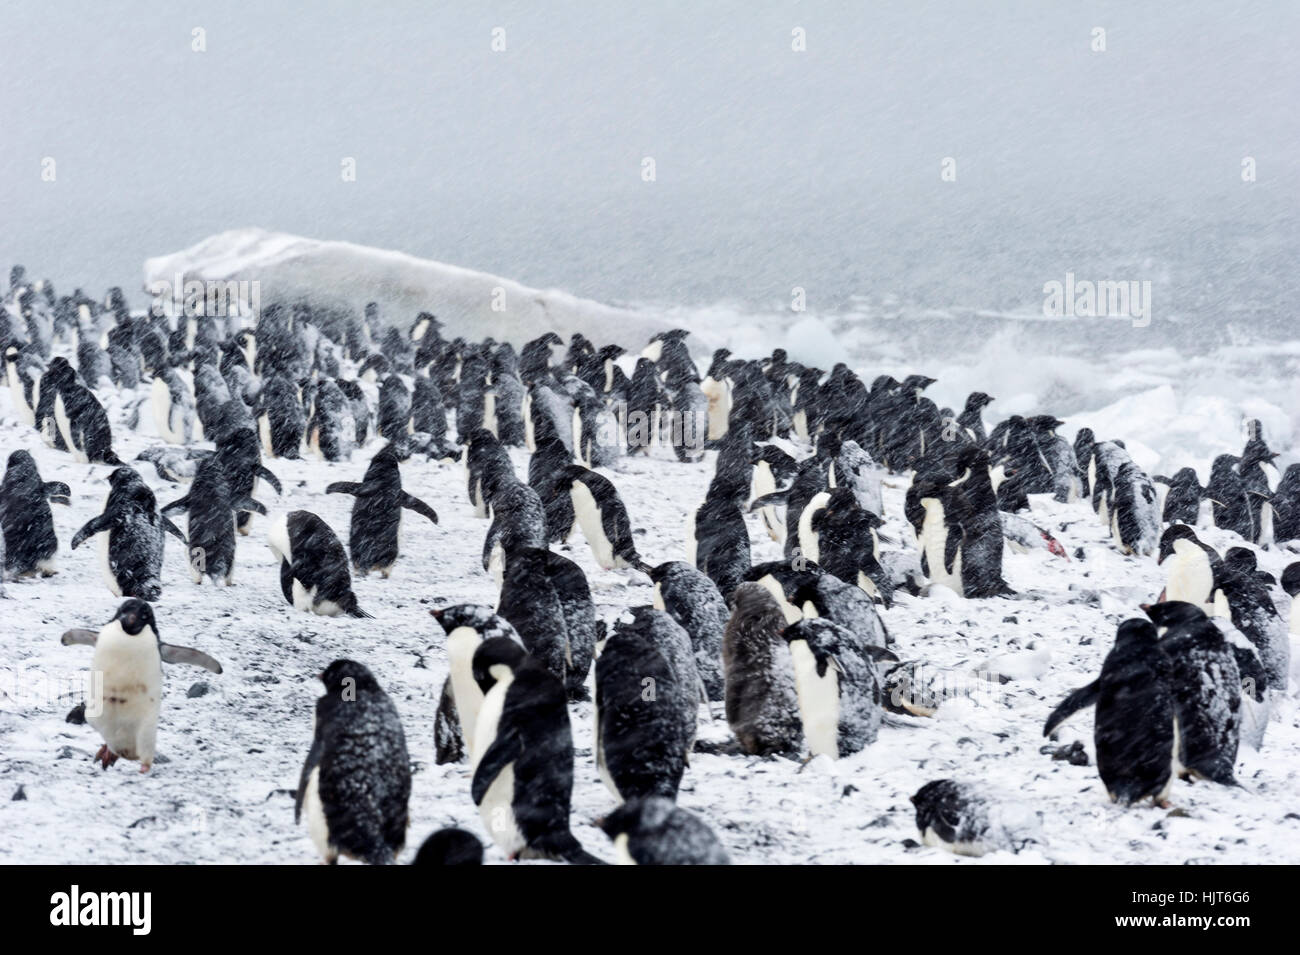 A breeding colony of Adelie Penguins during a snow storm on an island in Antarctica. Stock Photo